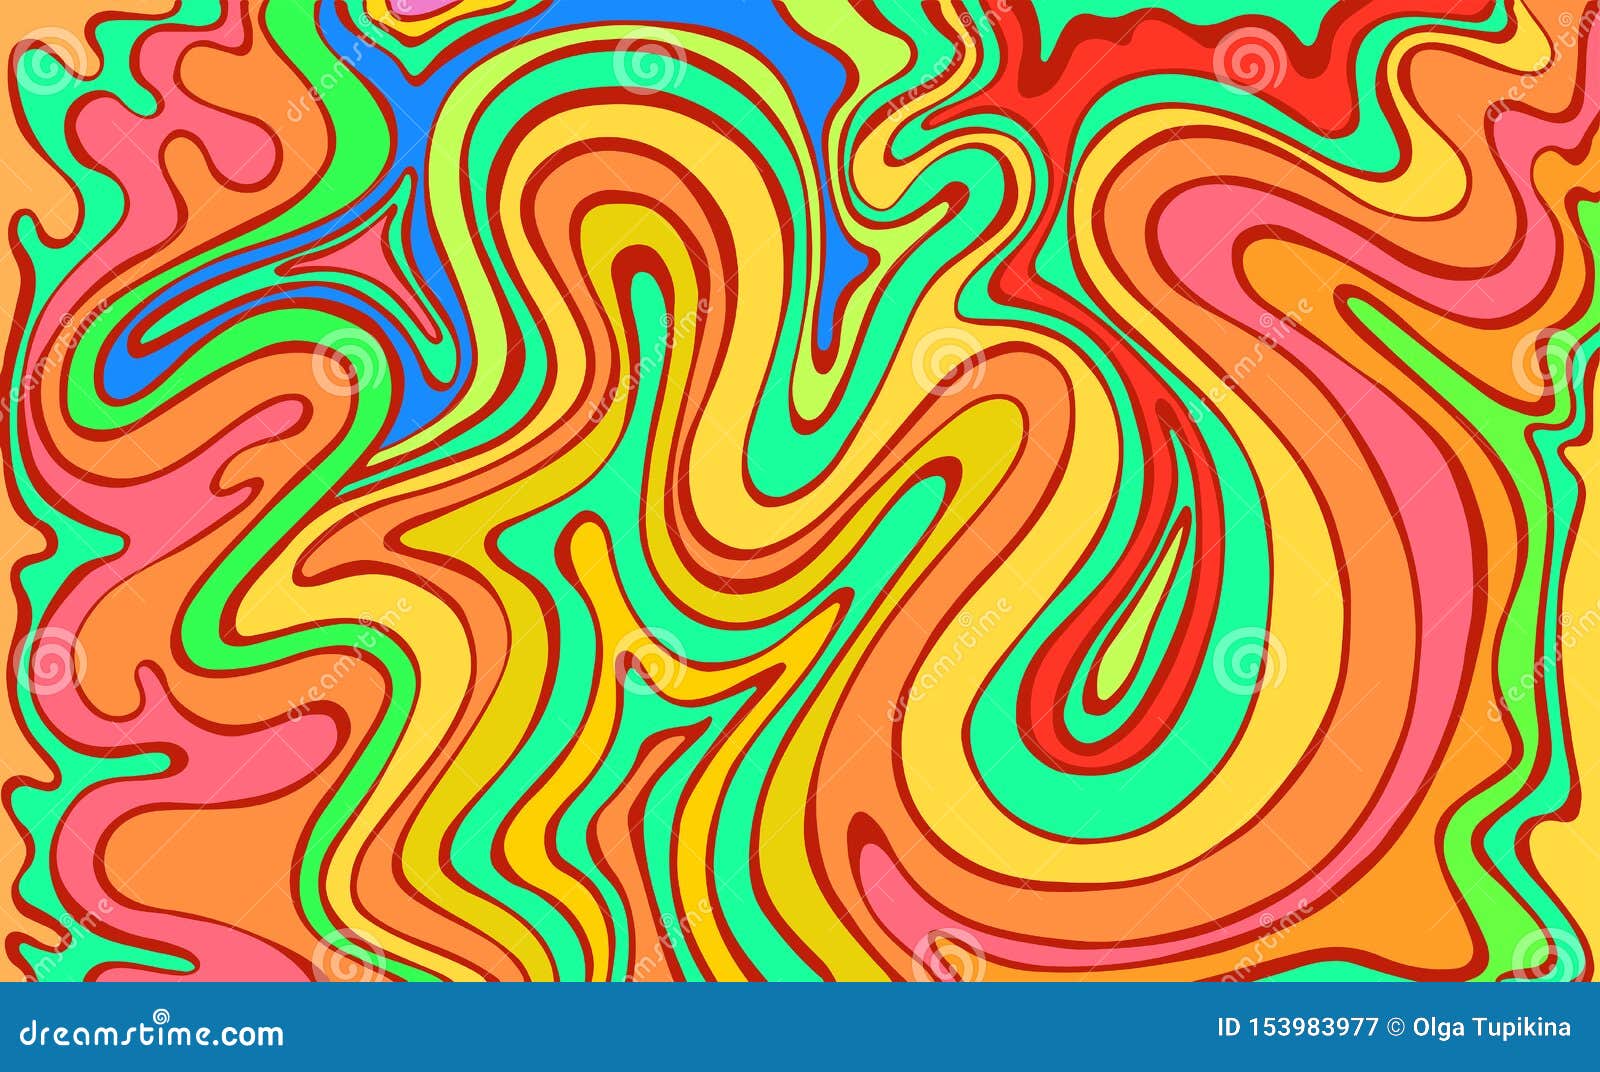 Psychedelic Colorful Waves. Fantastic Art with Decorative Texture ...